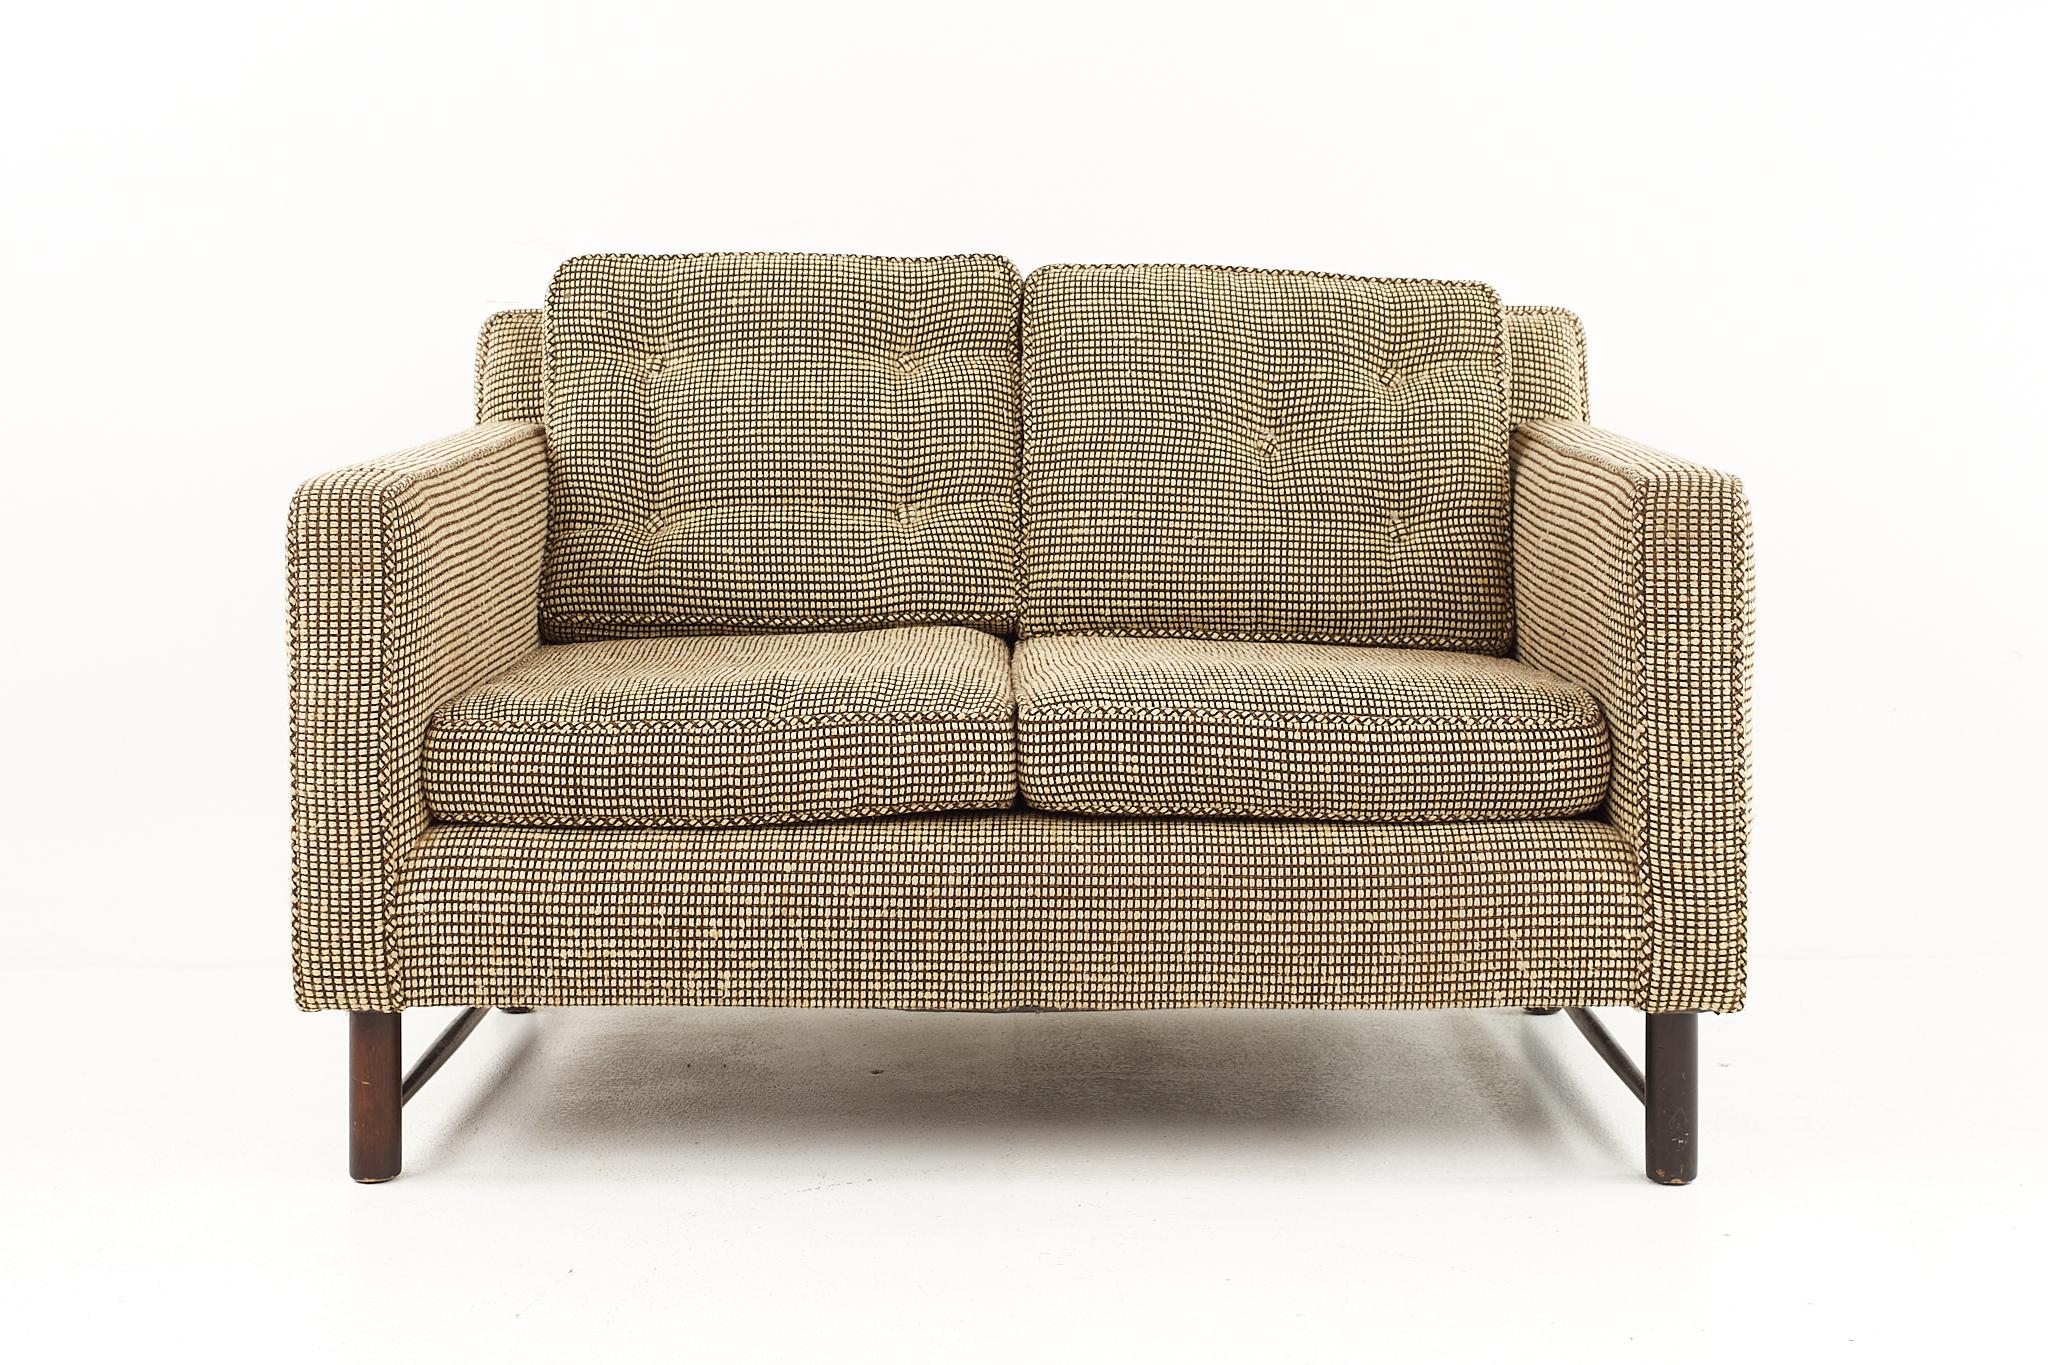 Edward Wormley for Dunbar mid-century settee.

The settee measures: 48.5 wide x 32 deep x 28 high, with a seat height of 16 inches and arm height of 23.25 inches.

All pieces of furniture can be had in what we call restored vintage condition.